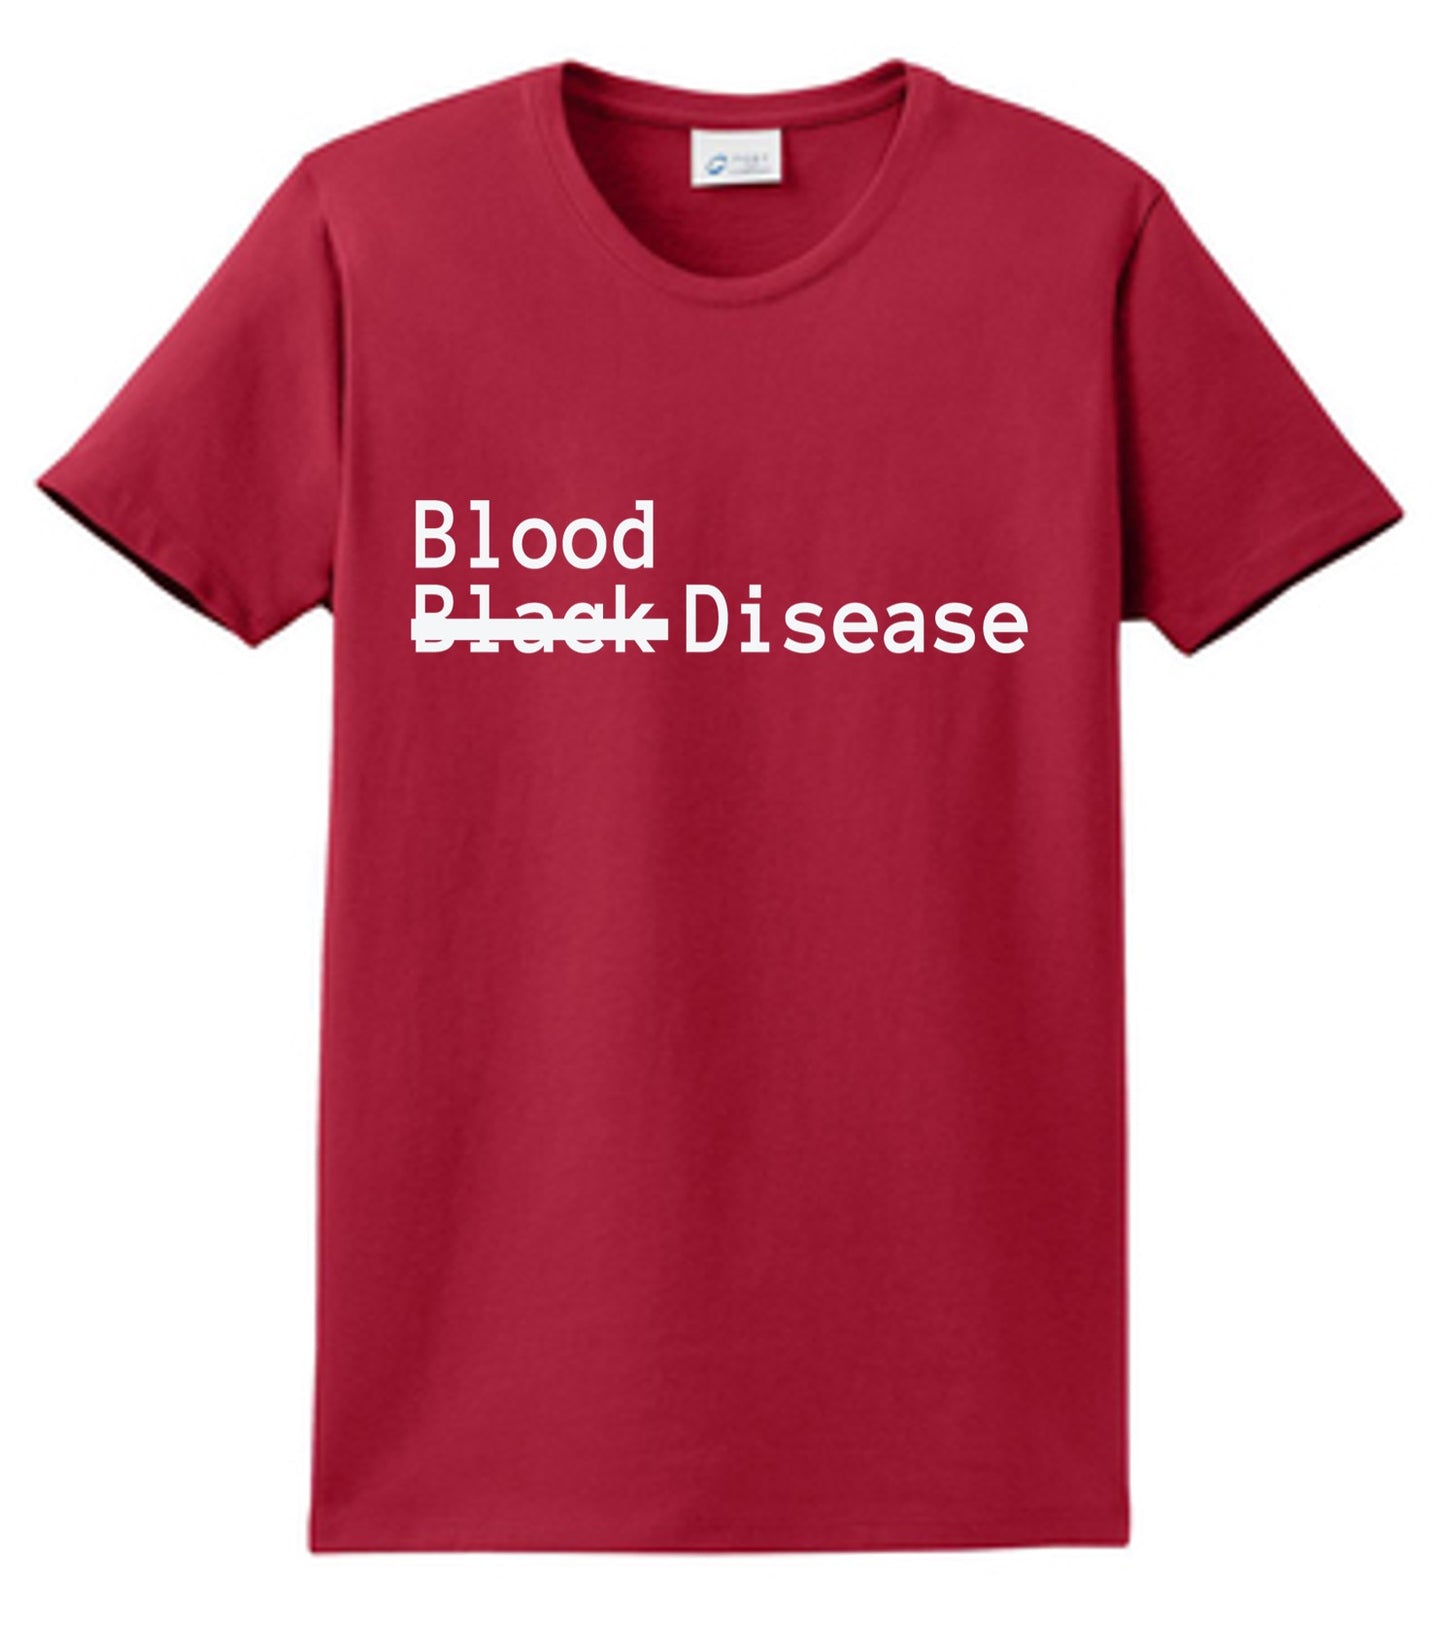 Sickle Cell is a BLOOD Condition NOT Black Condition